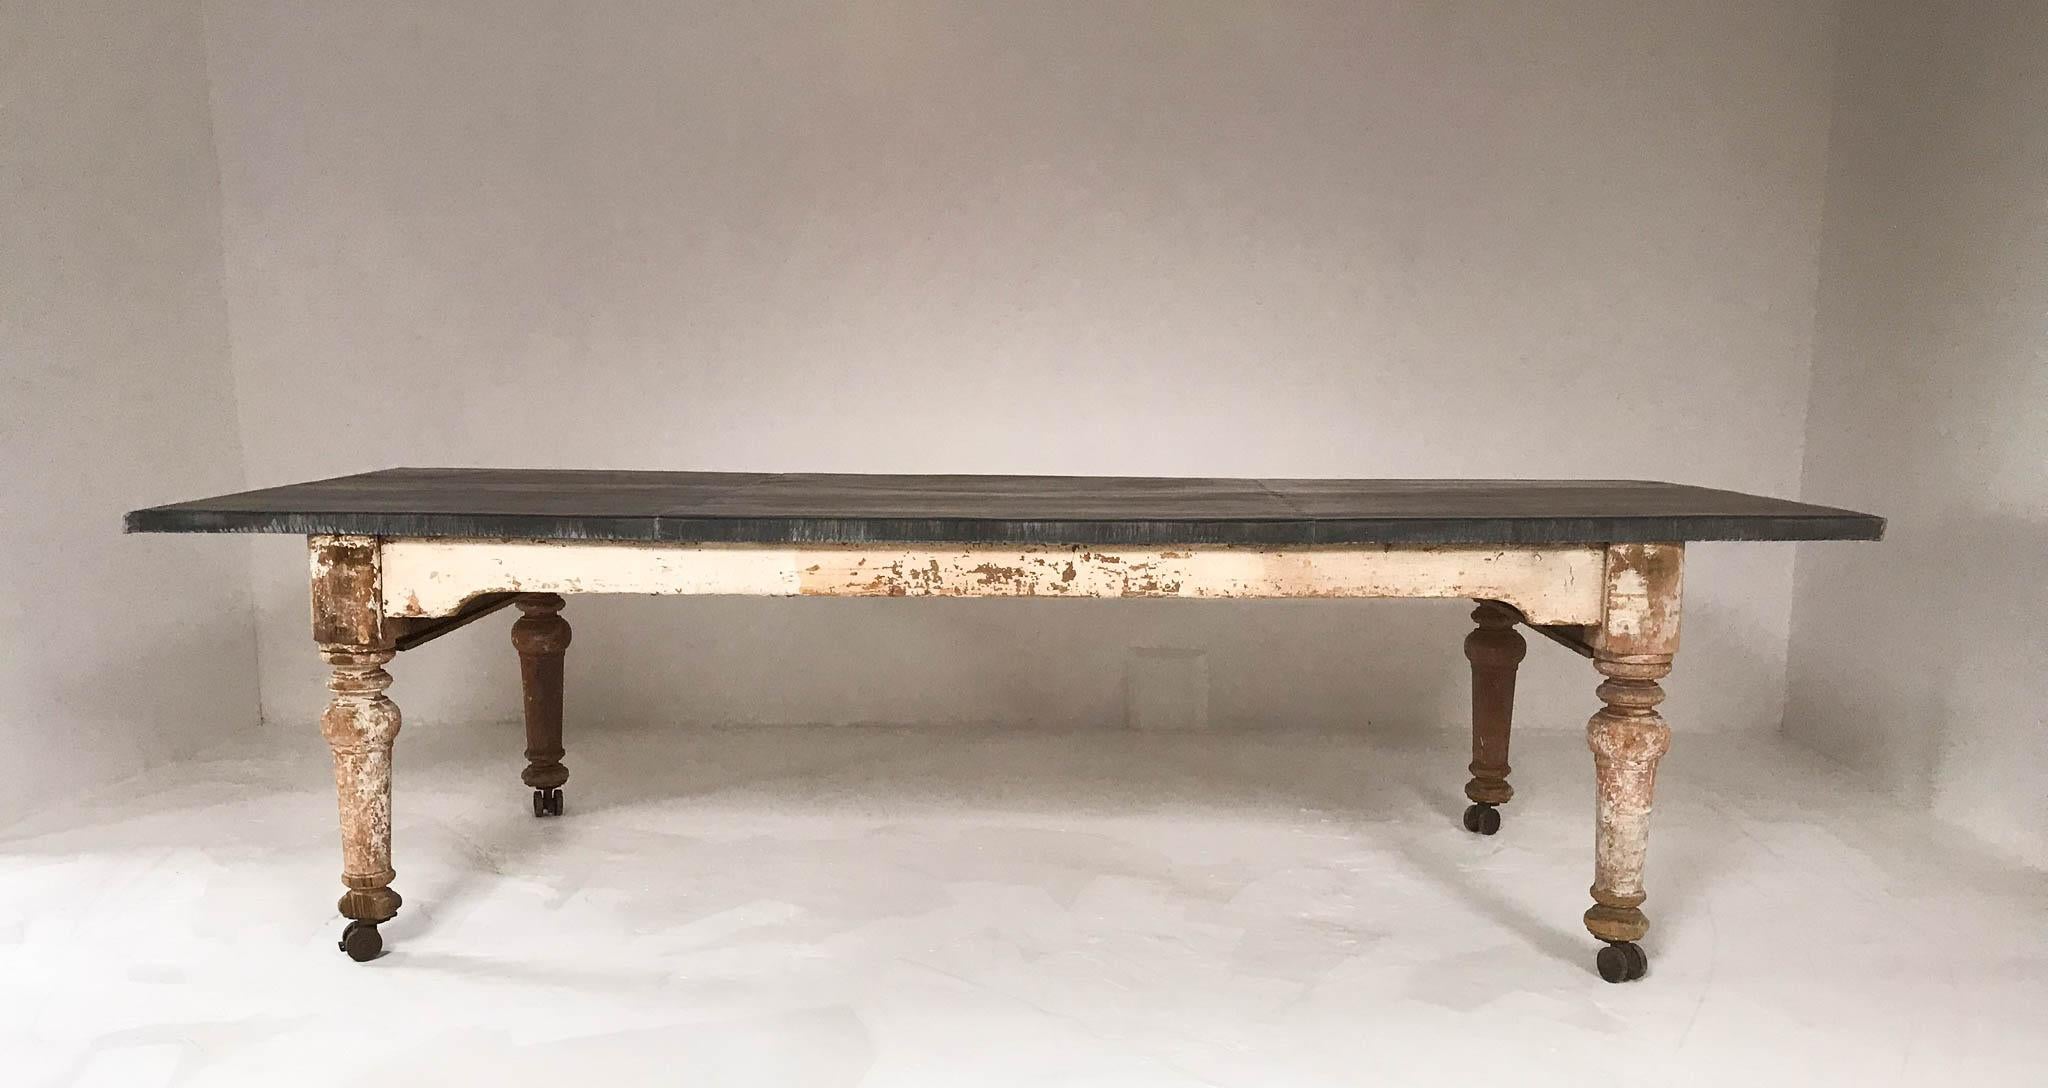 English 19th Century Victorian Rustic Dining Table with Aged Zinc Top